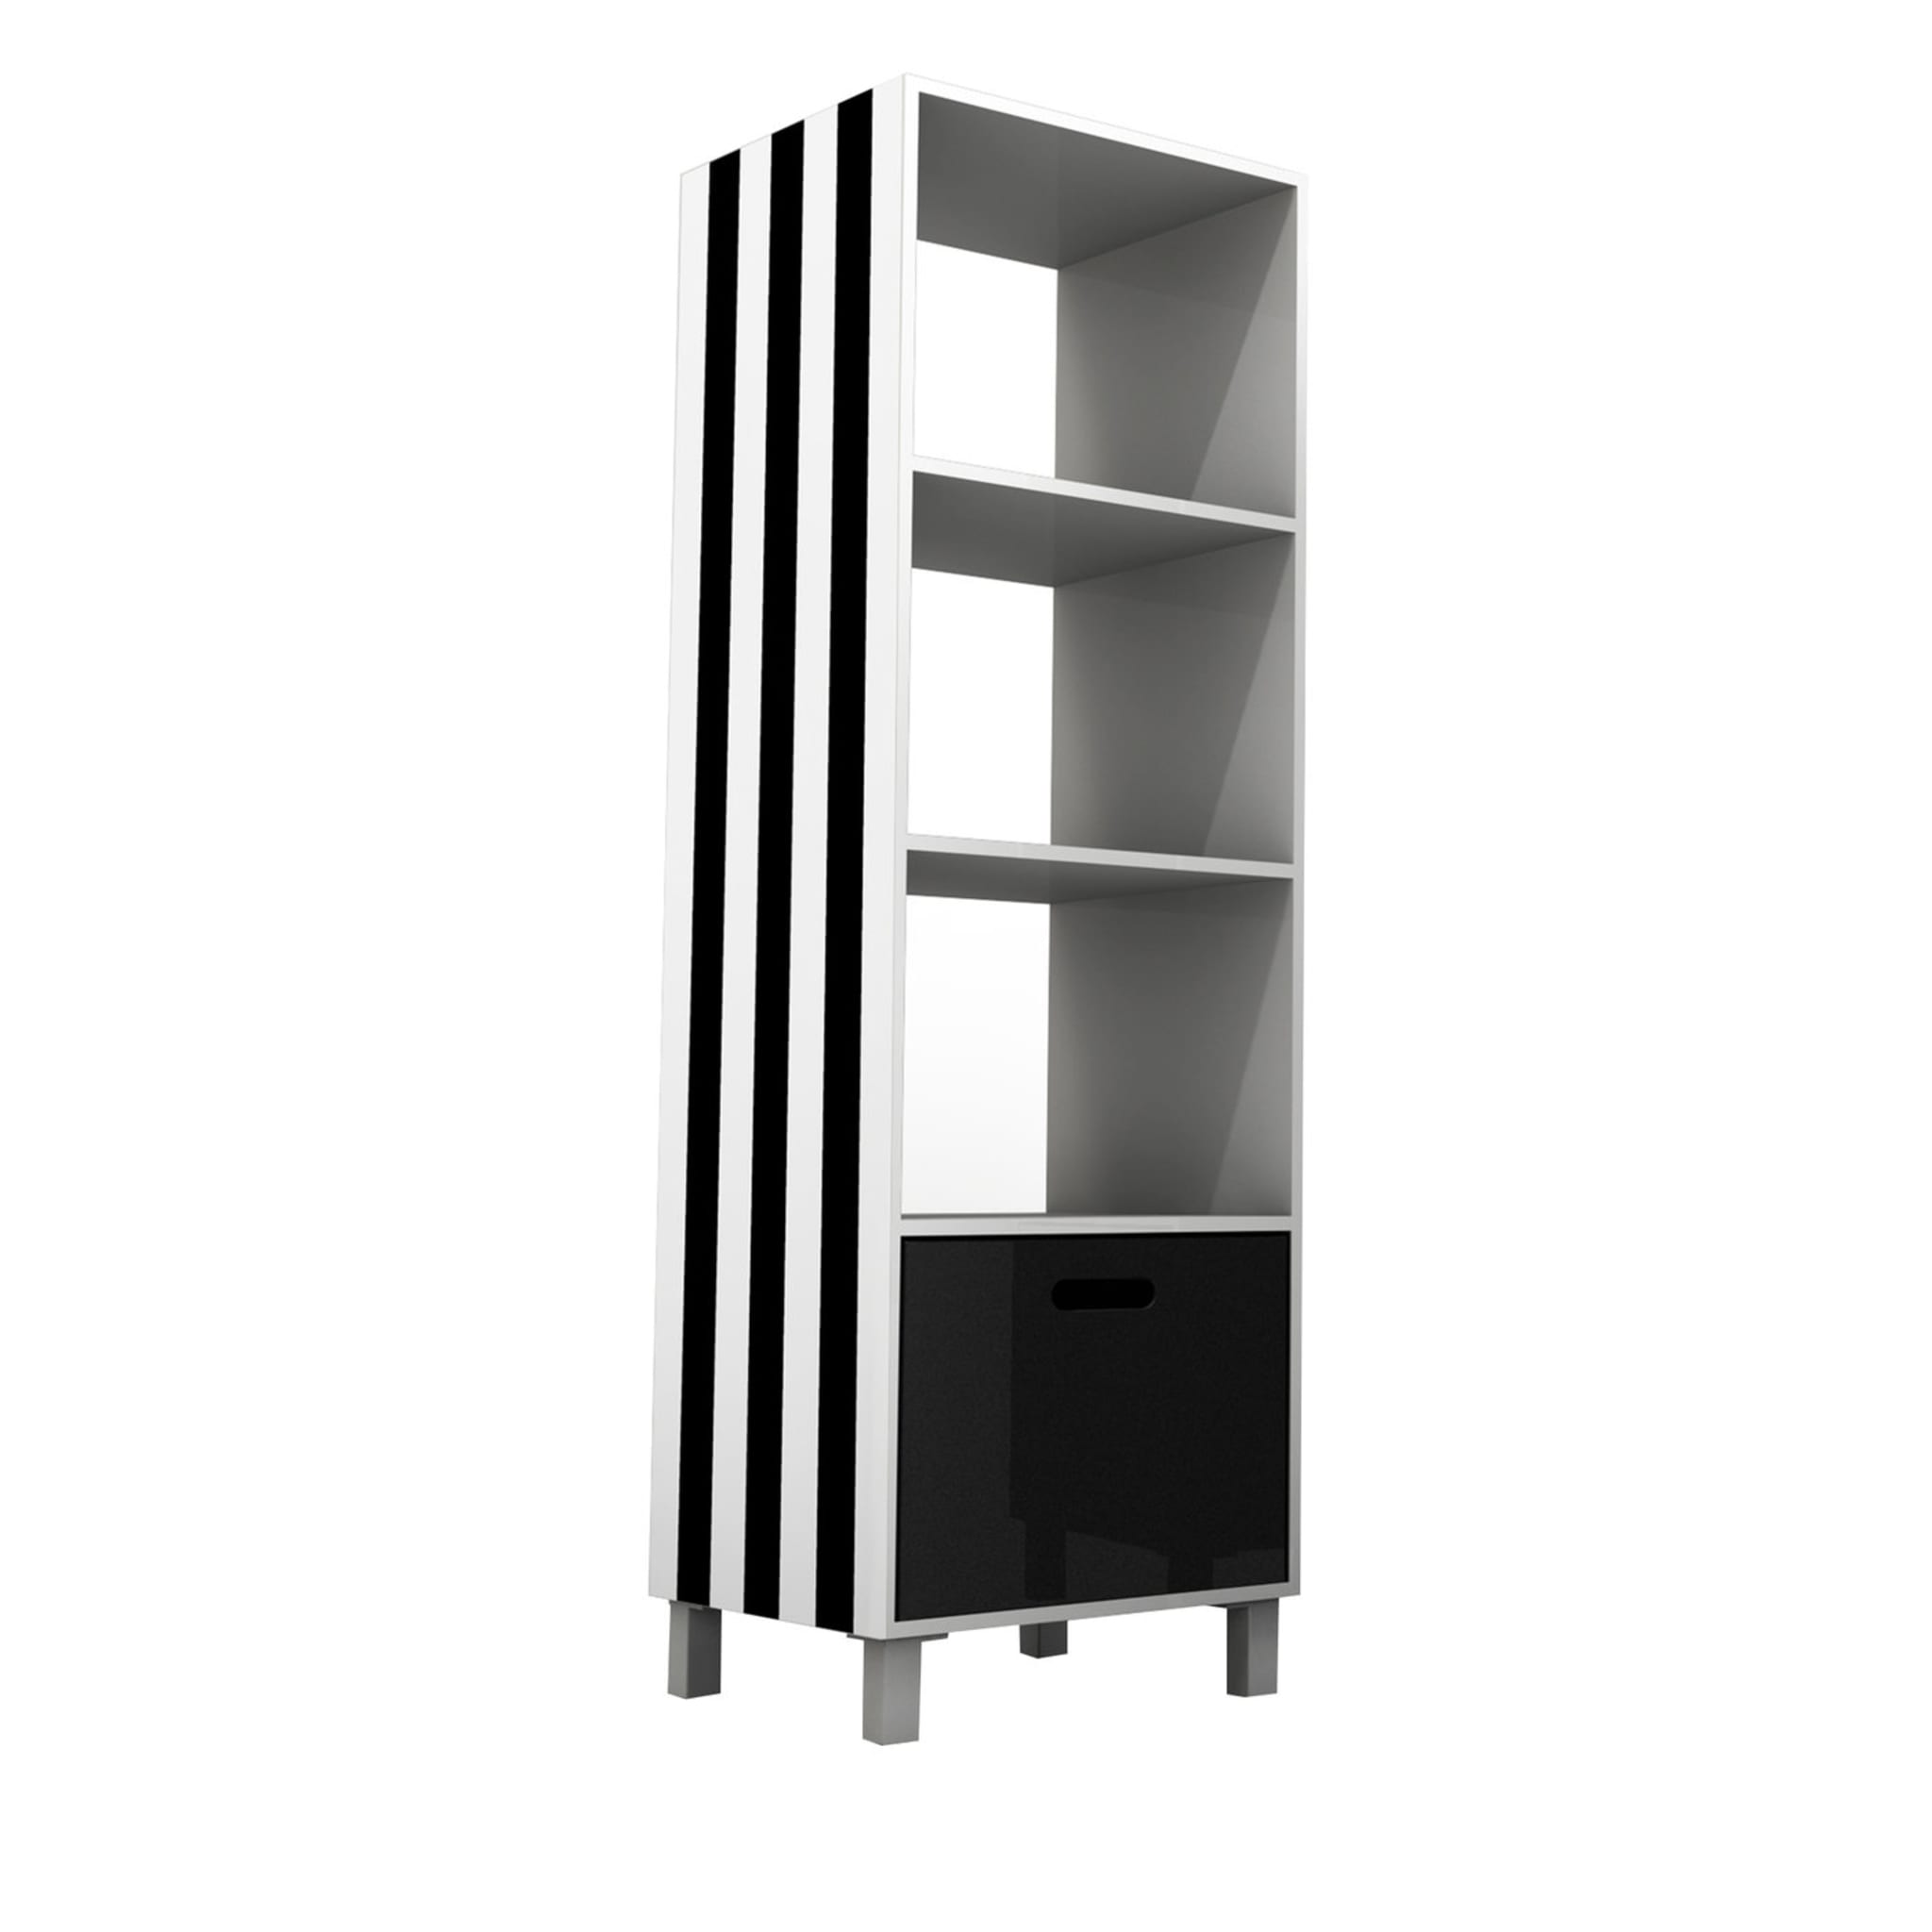 Simbolo White Tall Bookcase by Garilab by Piter Perbellini - Main view